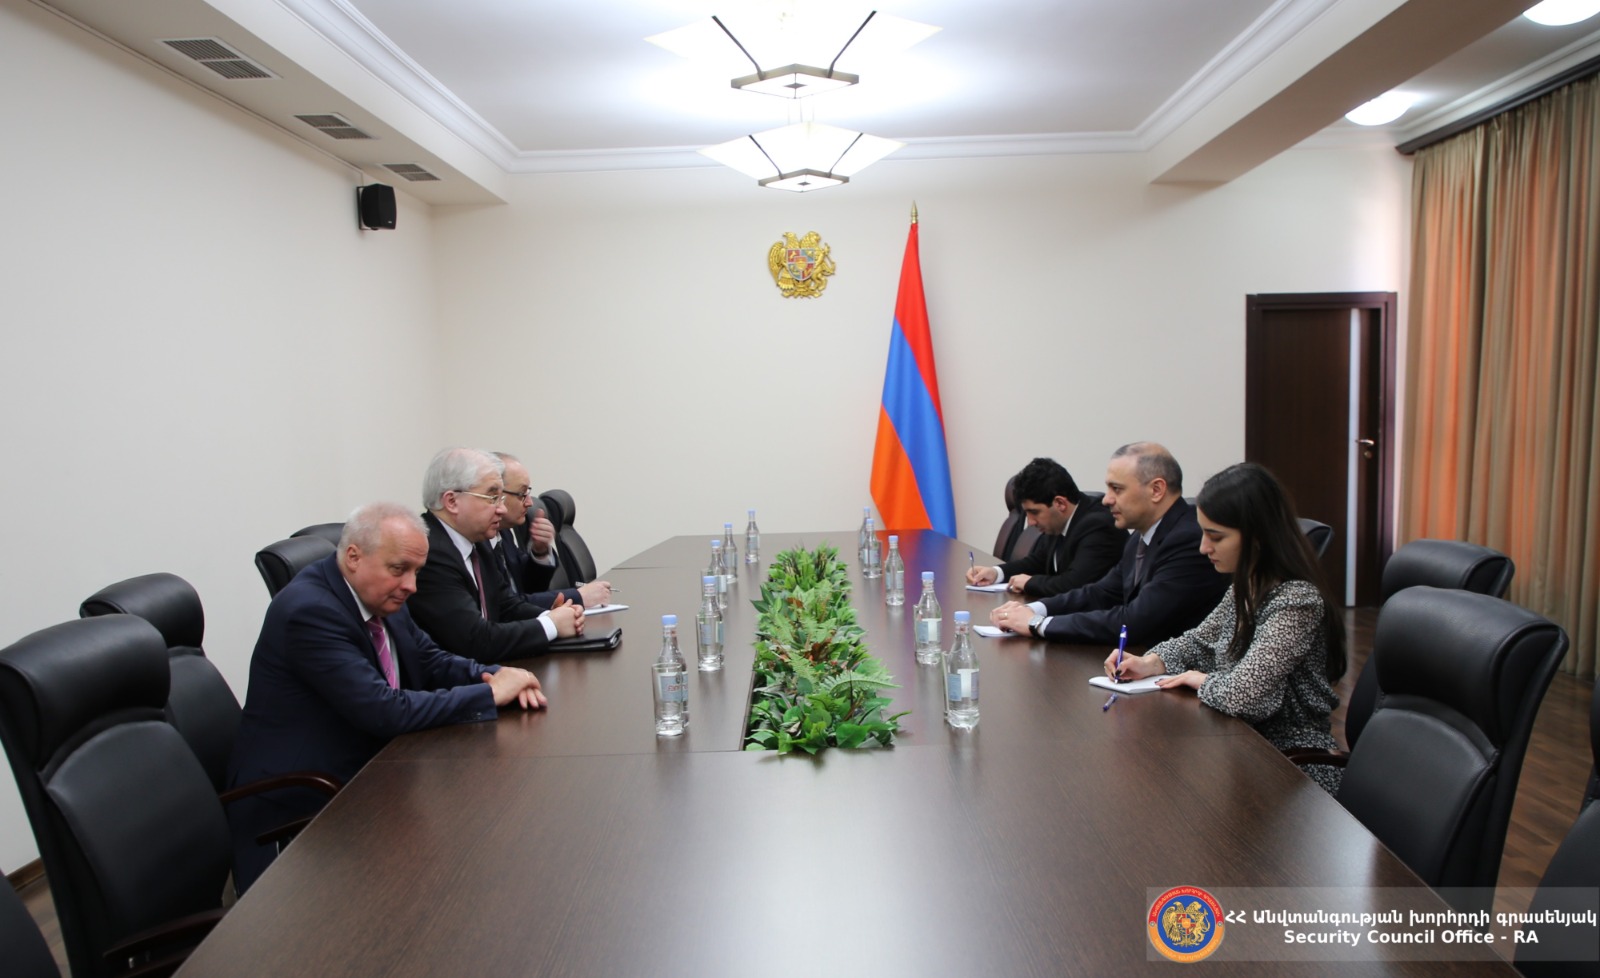 Secretary of Security Council and Khovaev discussed recent developments regarding normalization of relations between Armenia and Azerbaijan